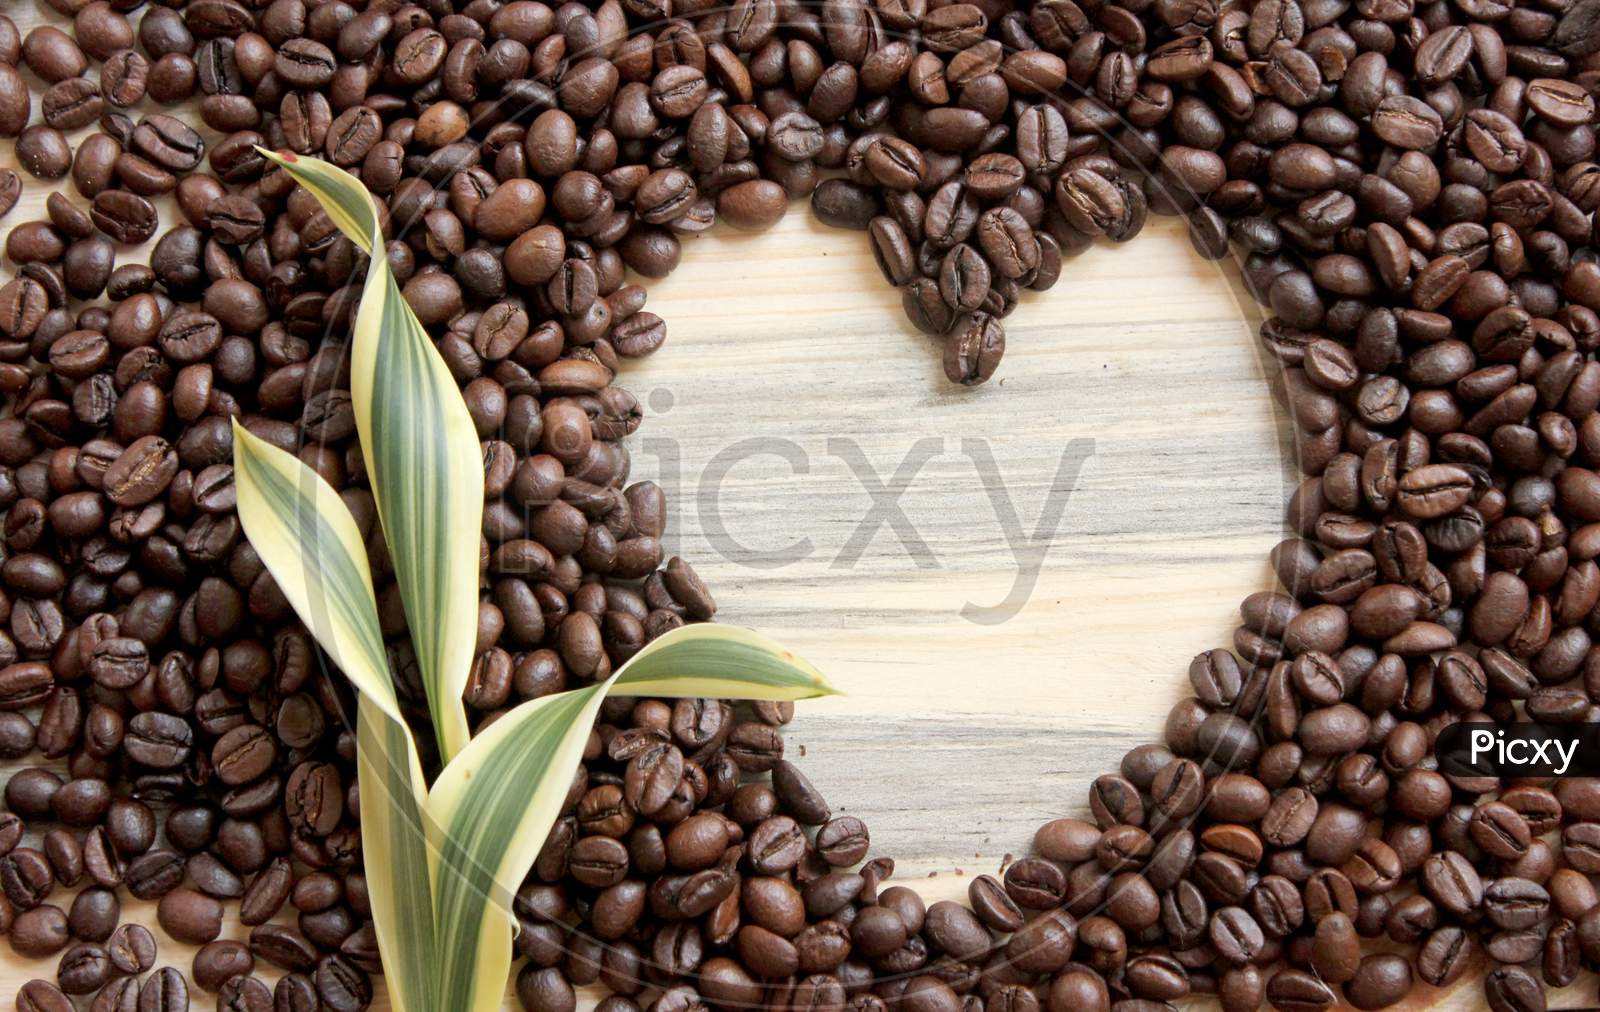 Coffee Beans With A Heart Shape